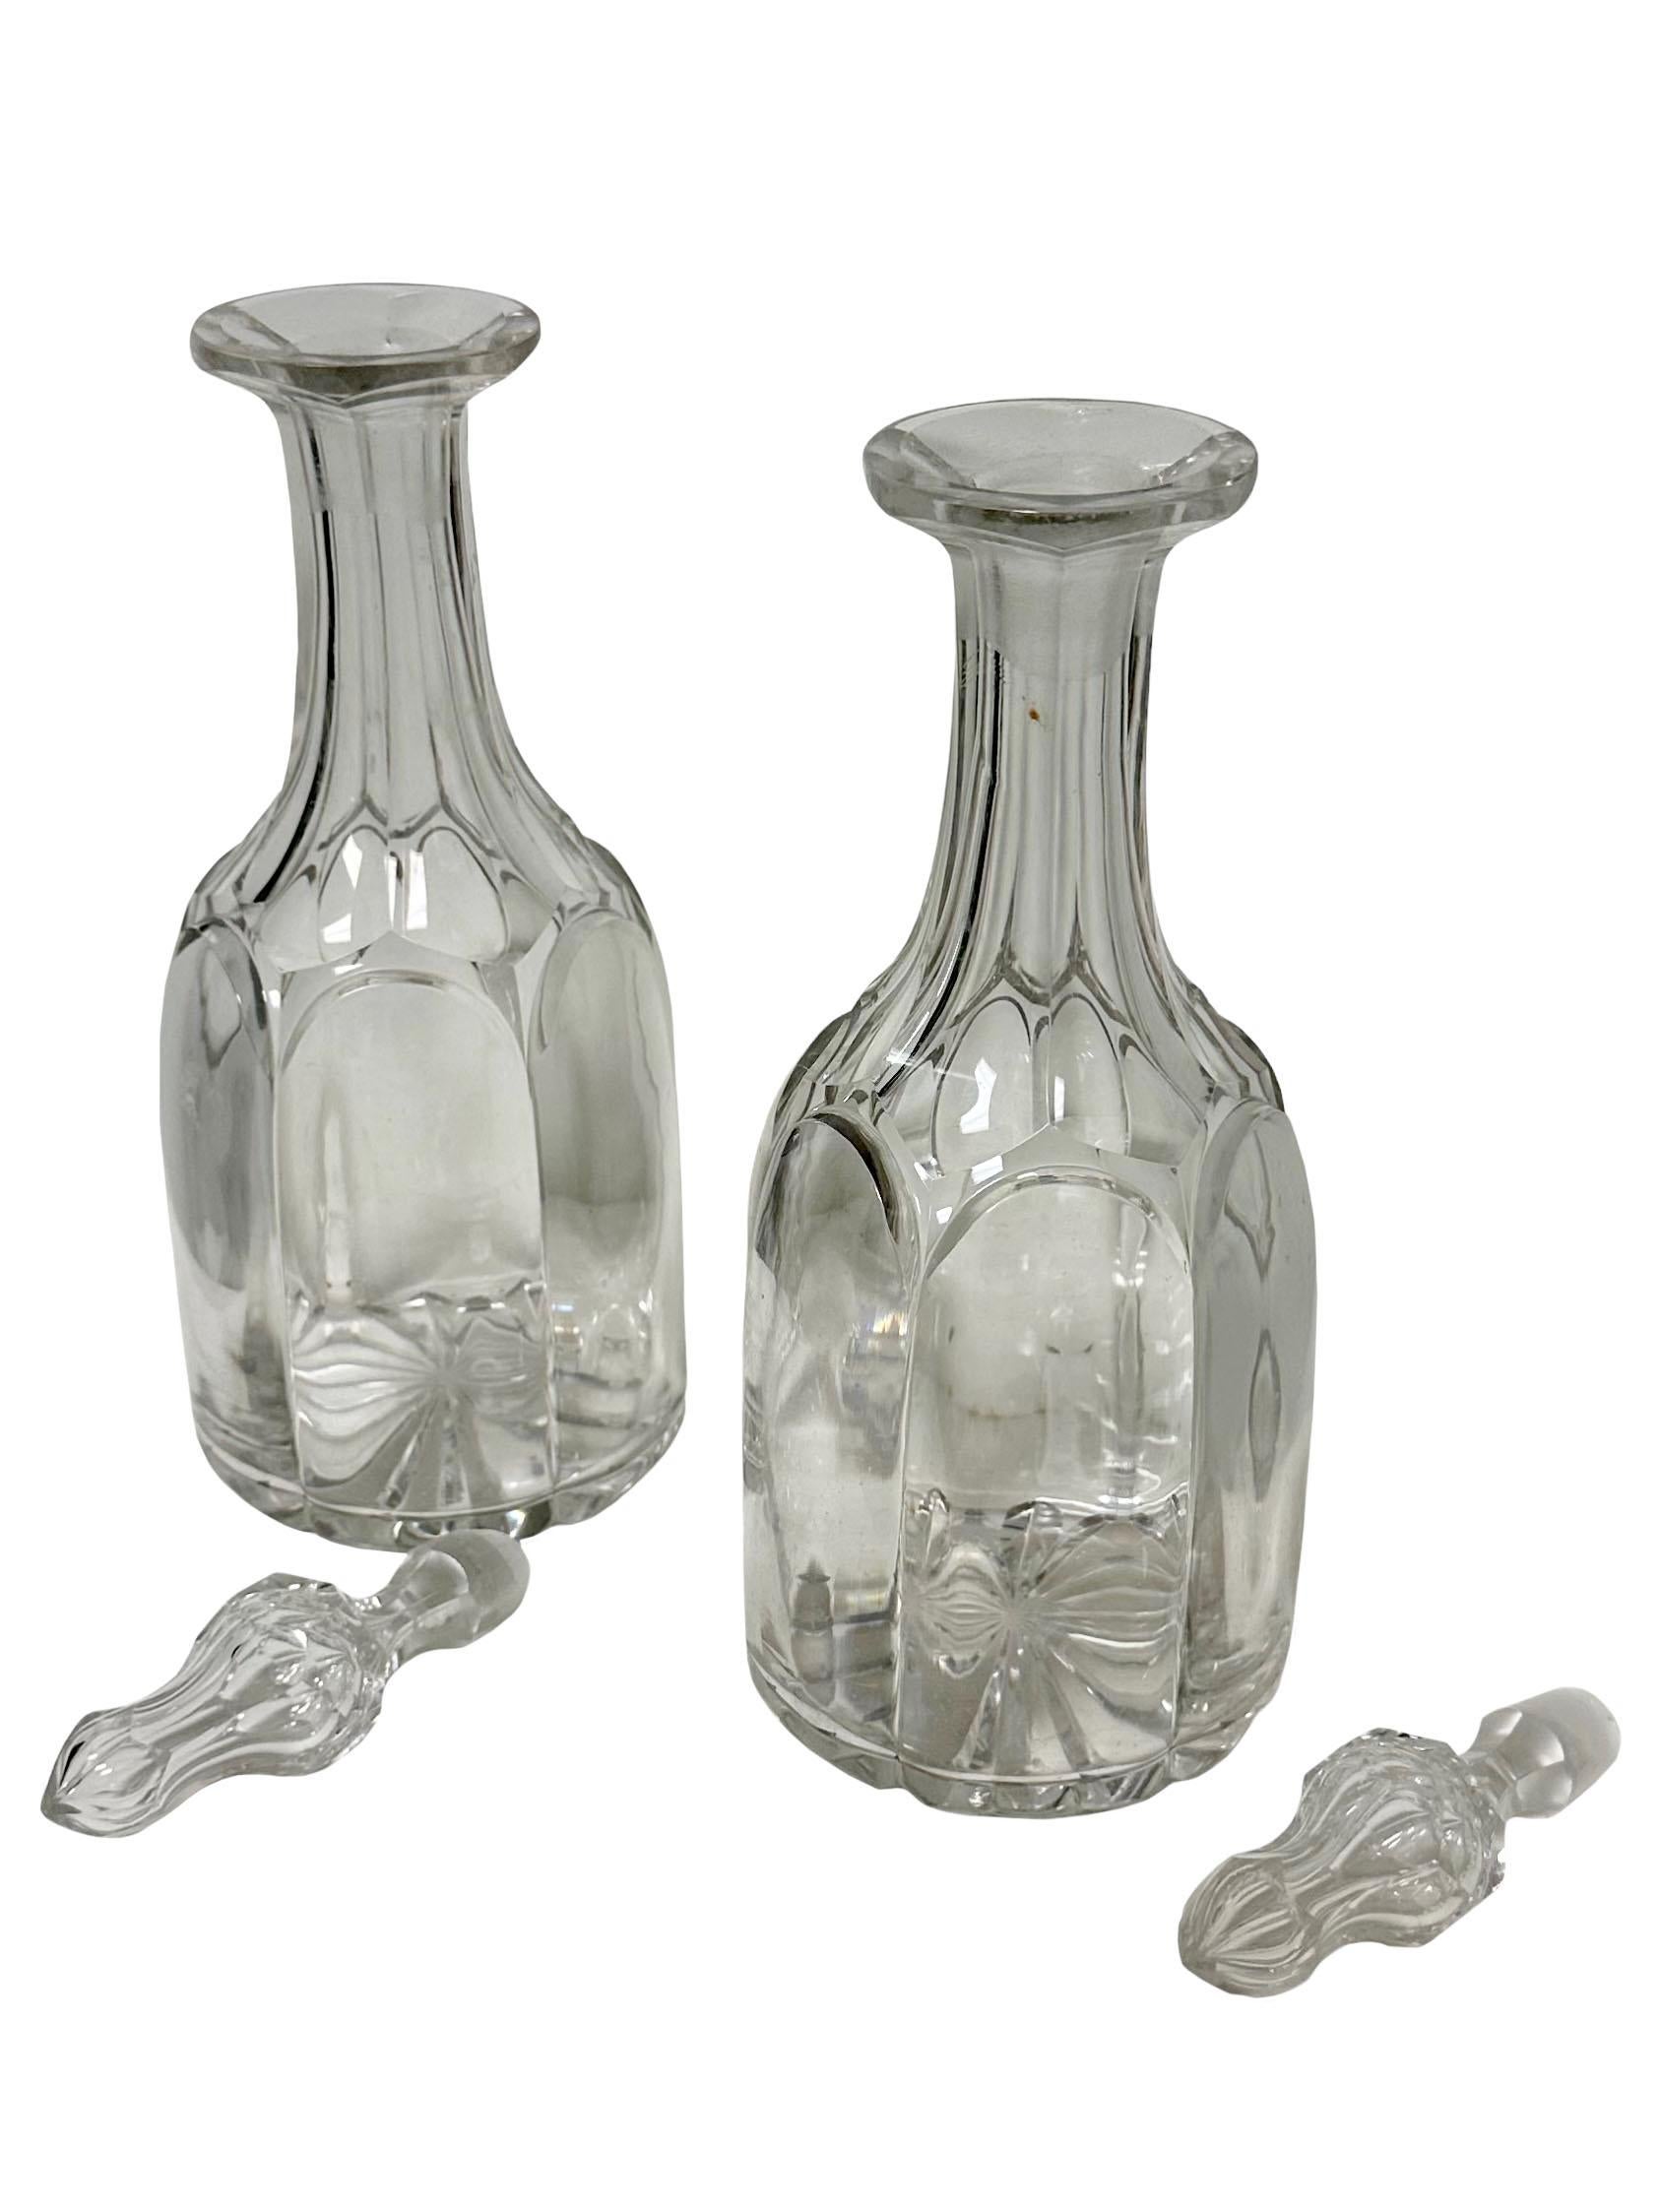 These are a beautiful pair of hand cut and hand blown lead crystal decanter’s with beautiful finials. They are about 1820 to 1830 and probably either Irish or Scottish but beautiful example of early glass. hey are in great condition they are hand